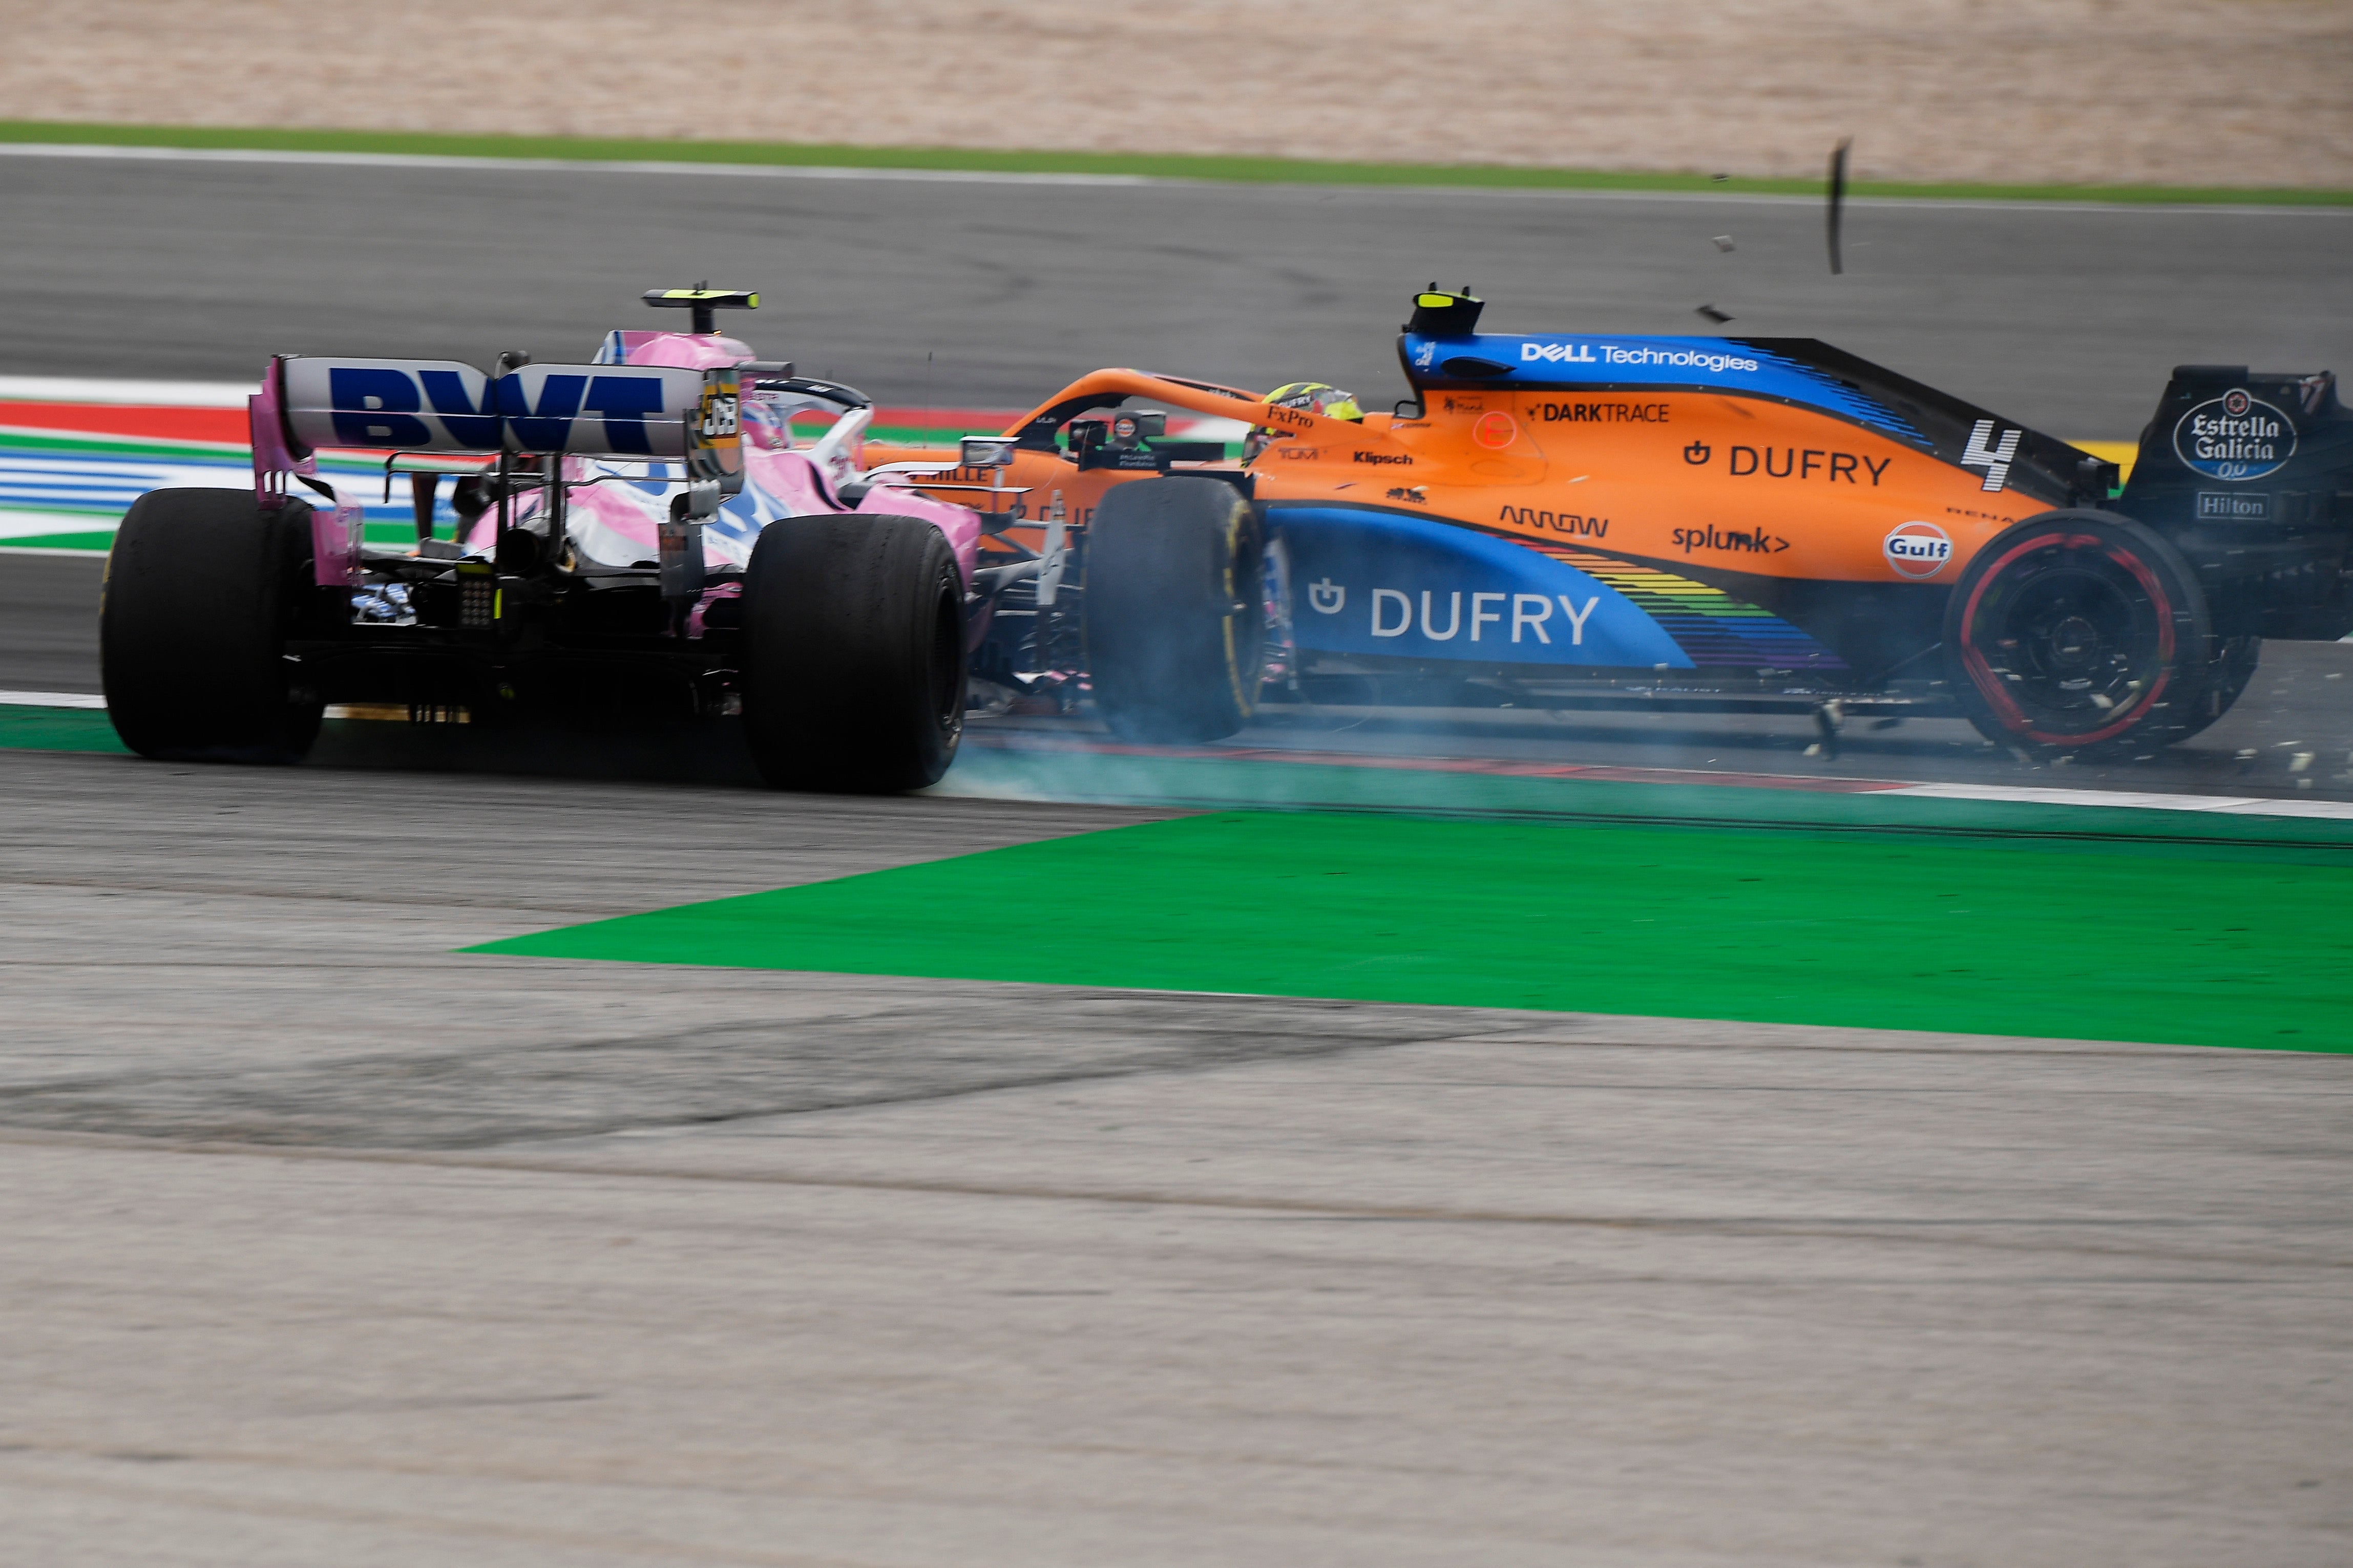 Stroll was punished for colliding with Lando Norris